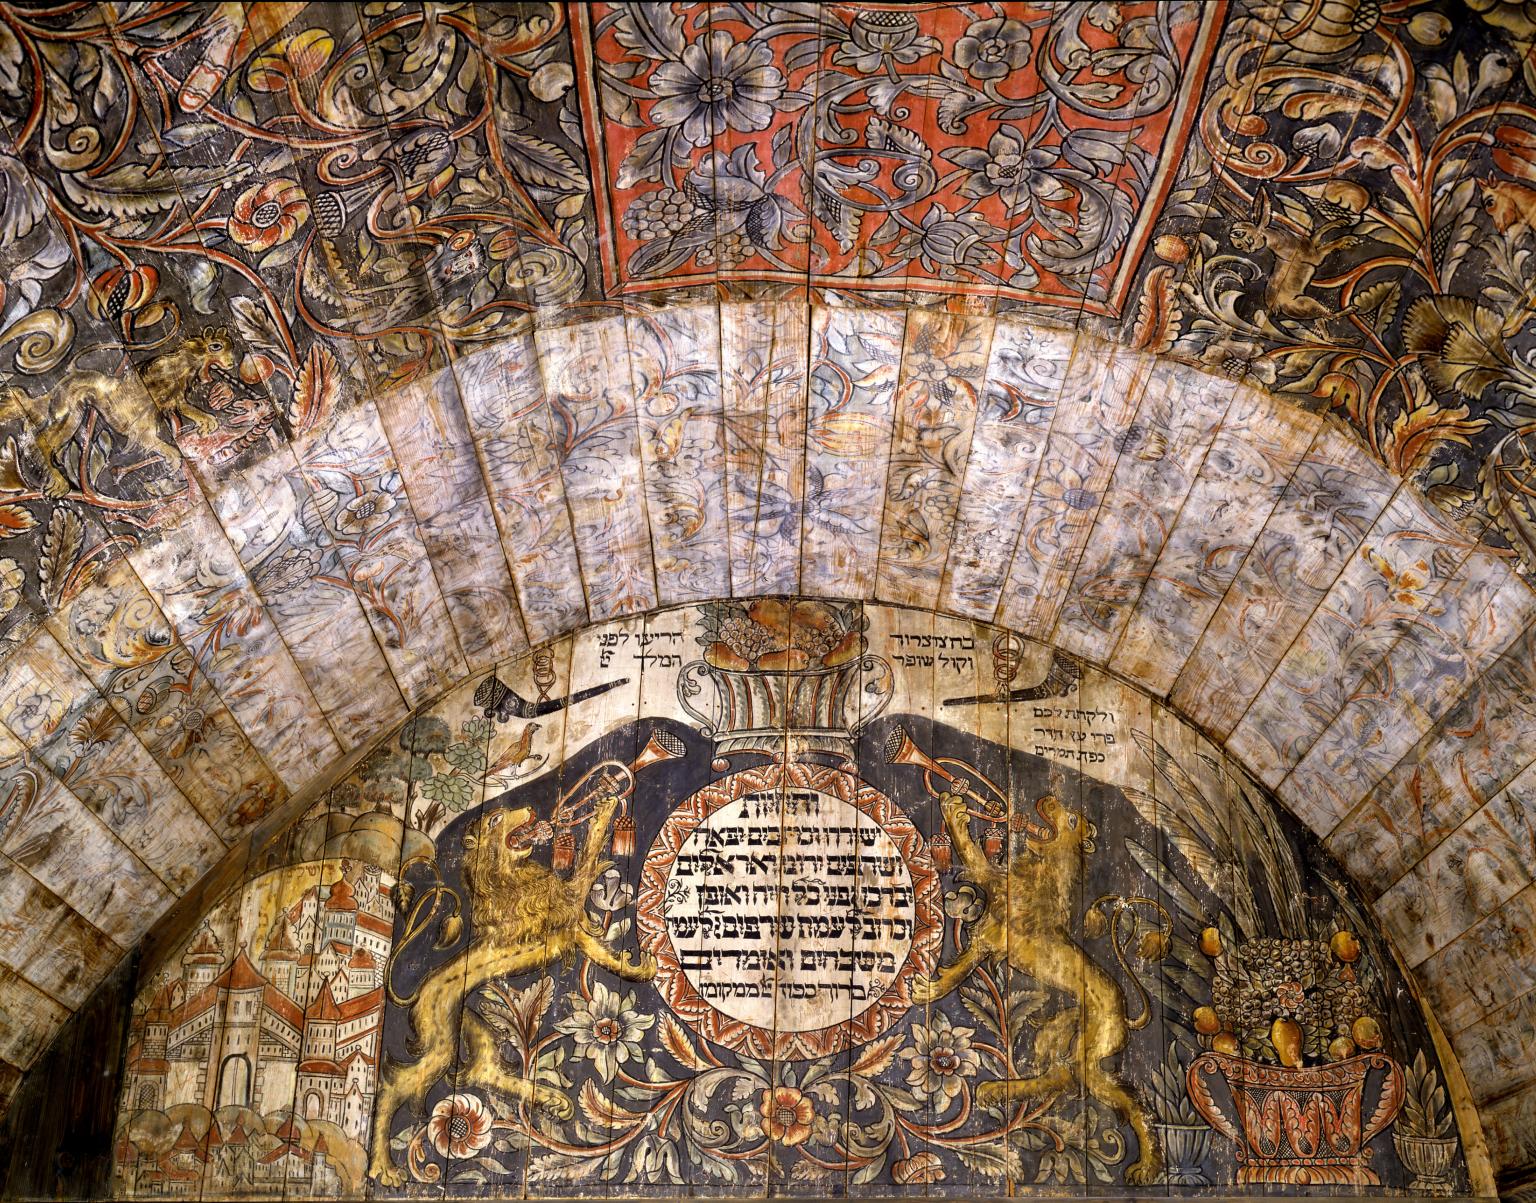 Close up photograph of wall and ceiling with painting of lions on either side of Hebrew text, city on left side, cornucopia on right side, and floral and plant designs on ceiling. 